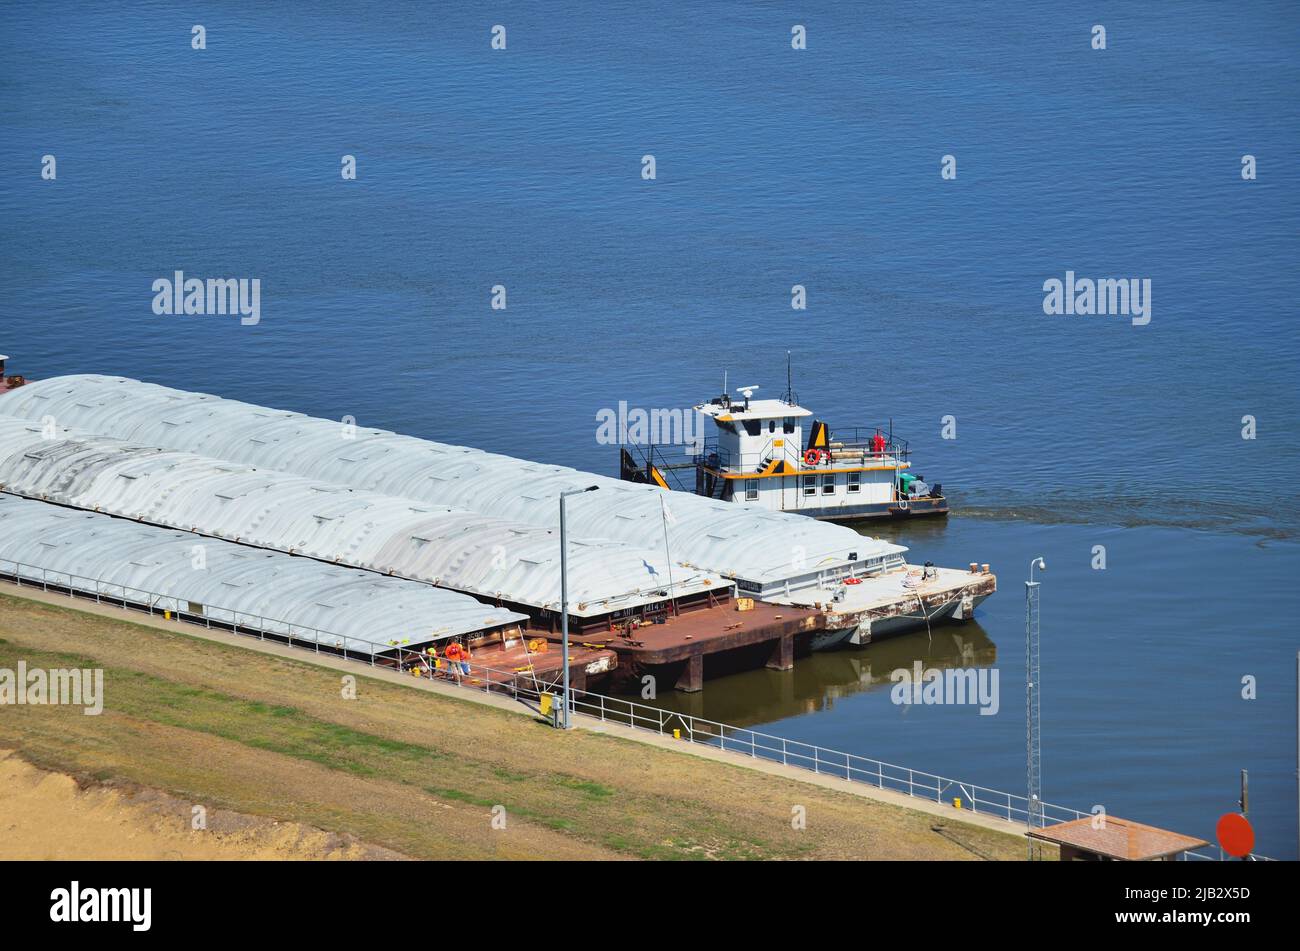 Dubuque, Iowa, USA.Tugboat positioning barges to pass through the channel at Lock and Dam #11 on the Mississippi River. A series of dams such as this Stock Photo